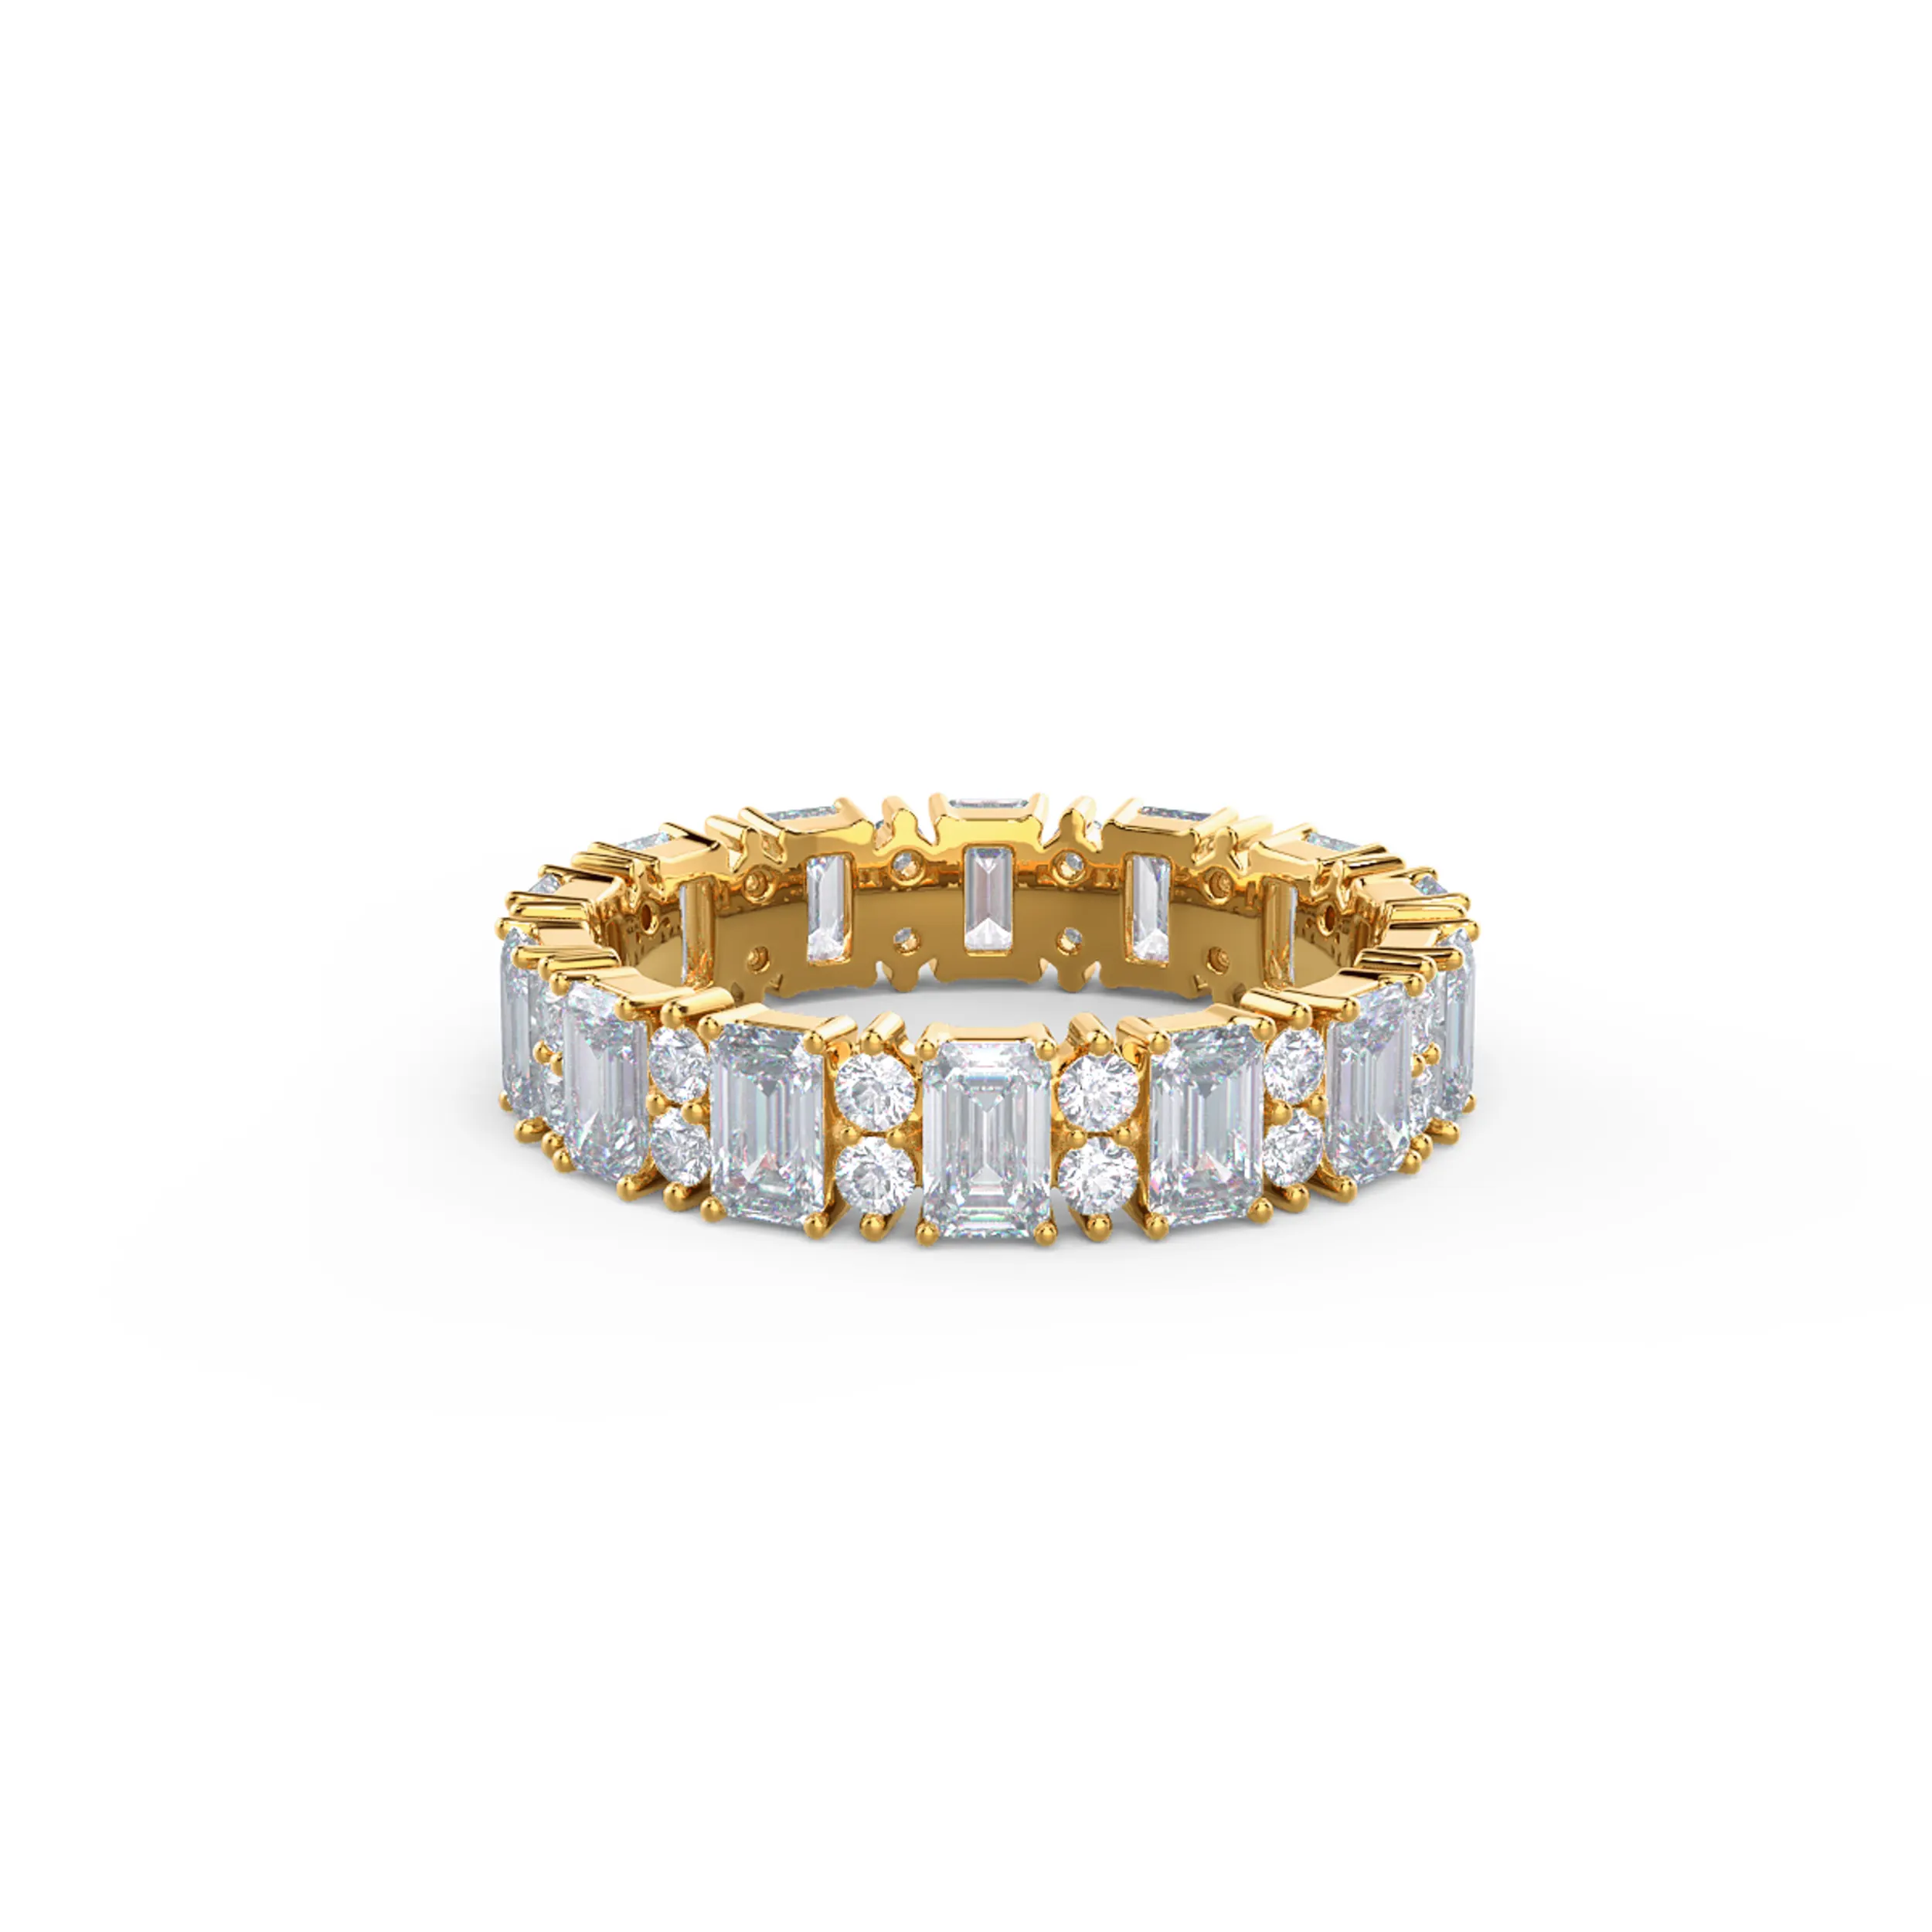 14k Yellow Gold Emerald and Round Eternity Band featuring High Quality 3.3 Carat Man Made Diamonds (Main View)